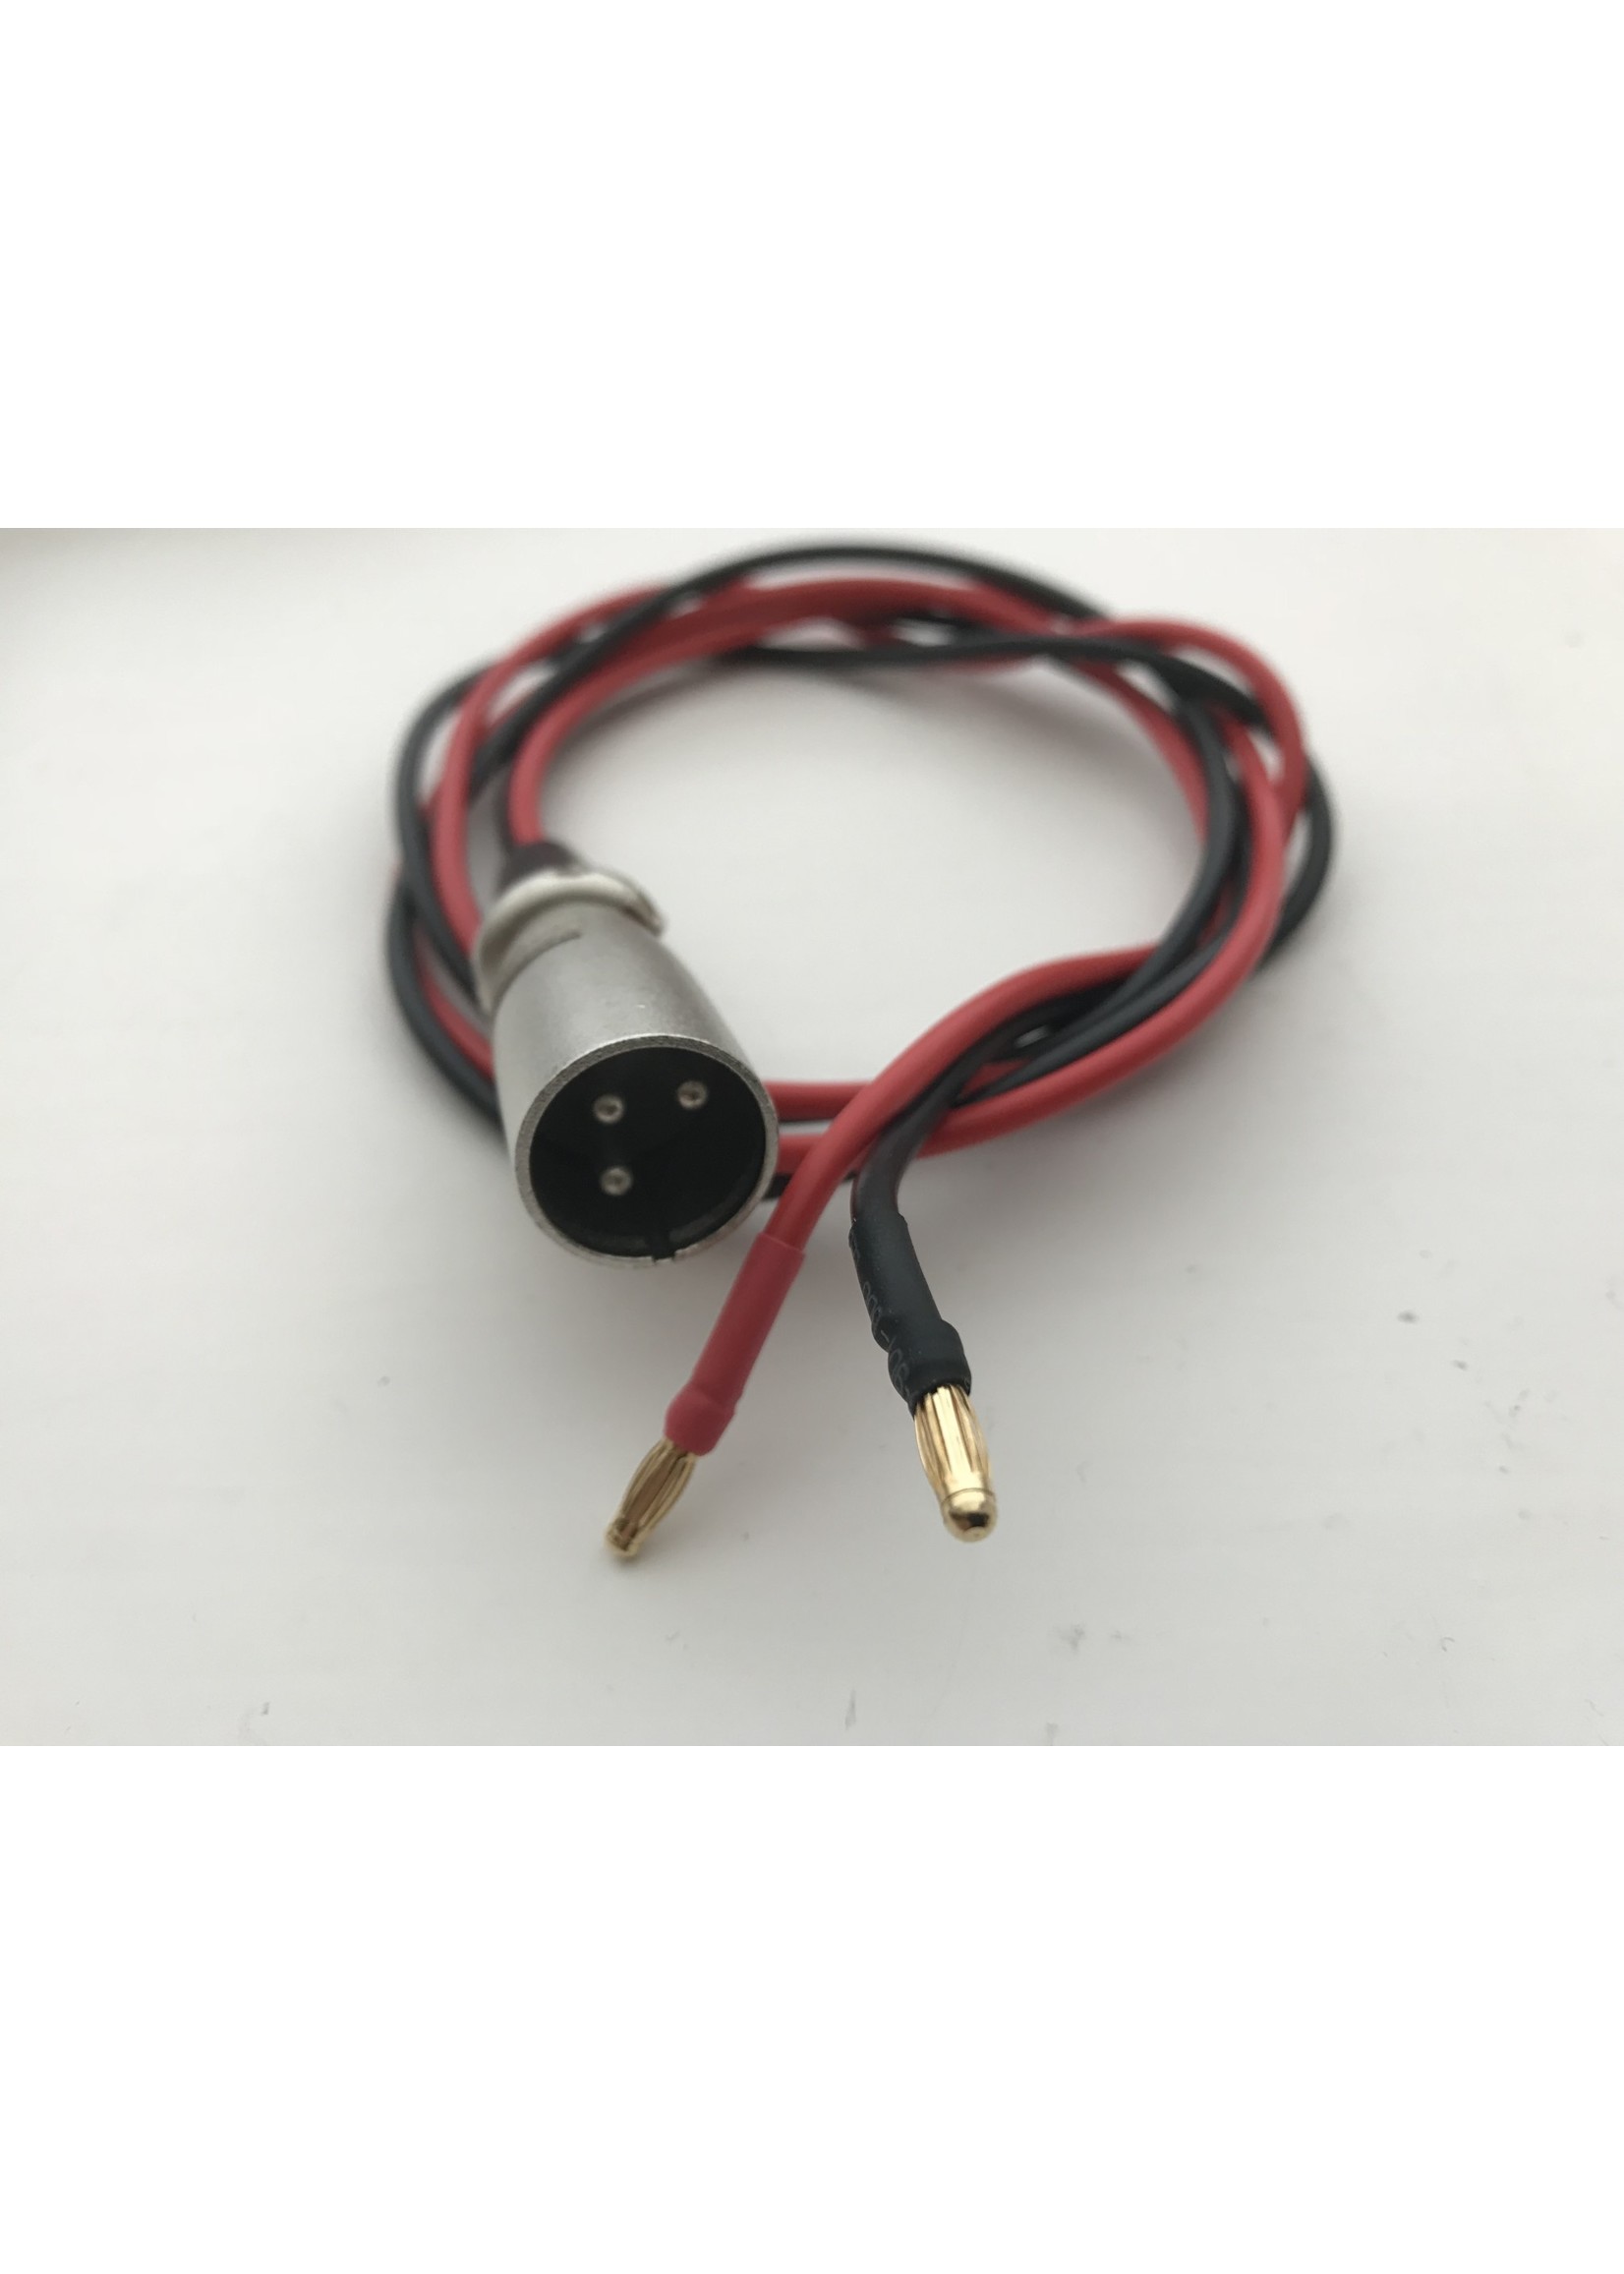 Batterytester Universal Test Cable 4 mm round contact points